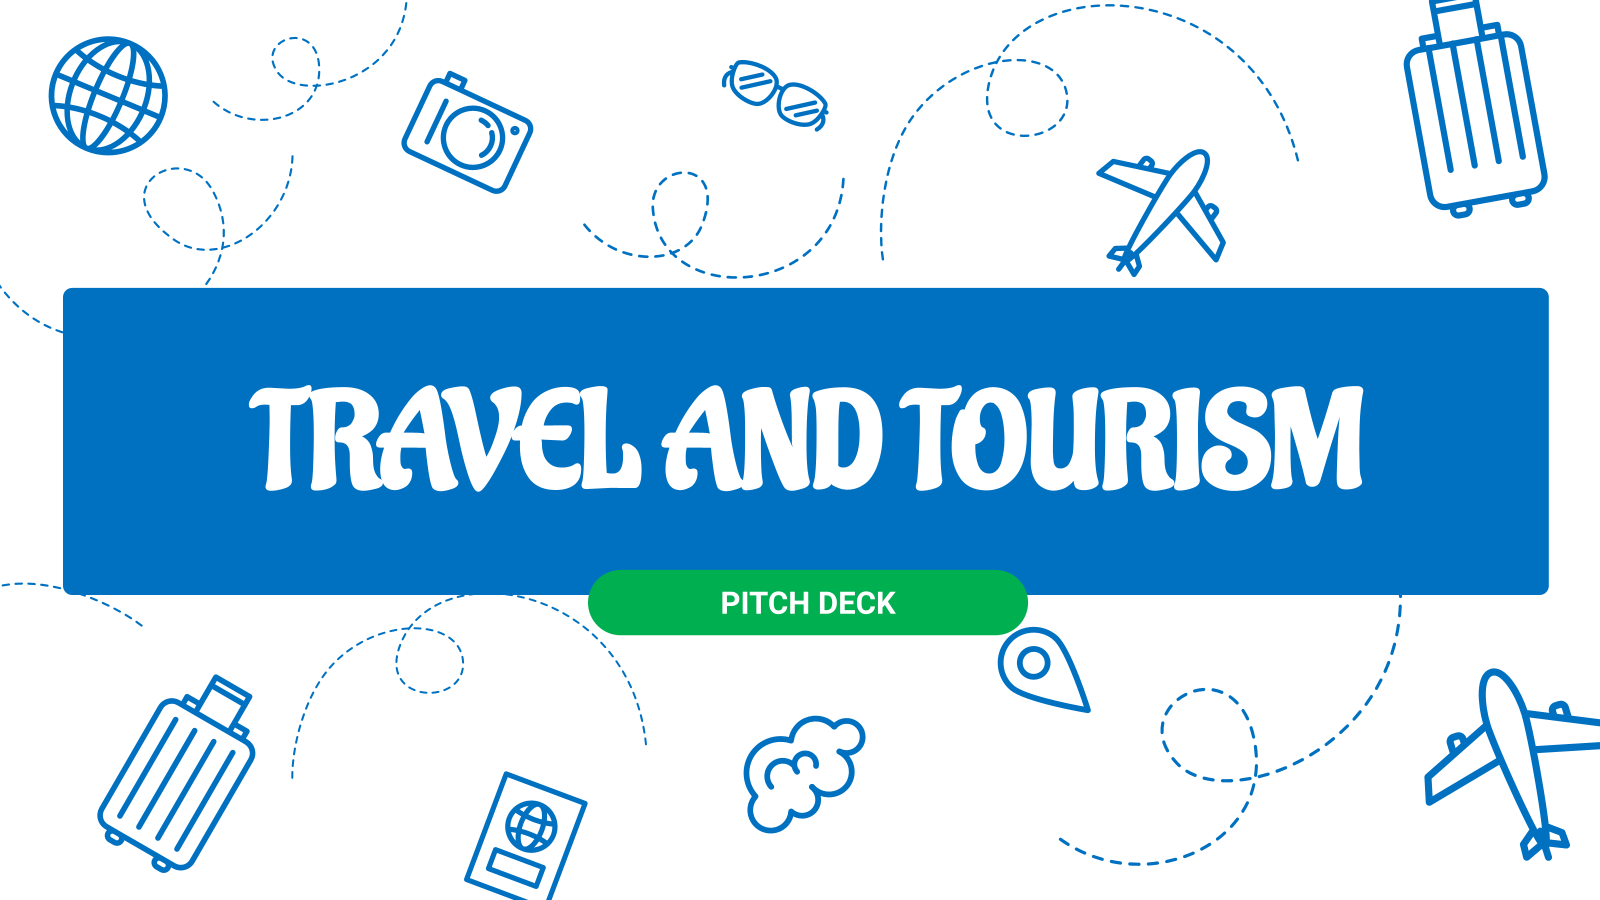 Travel and Tourism Pitch Deck